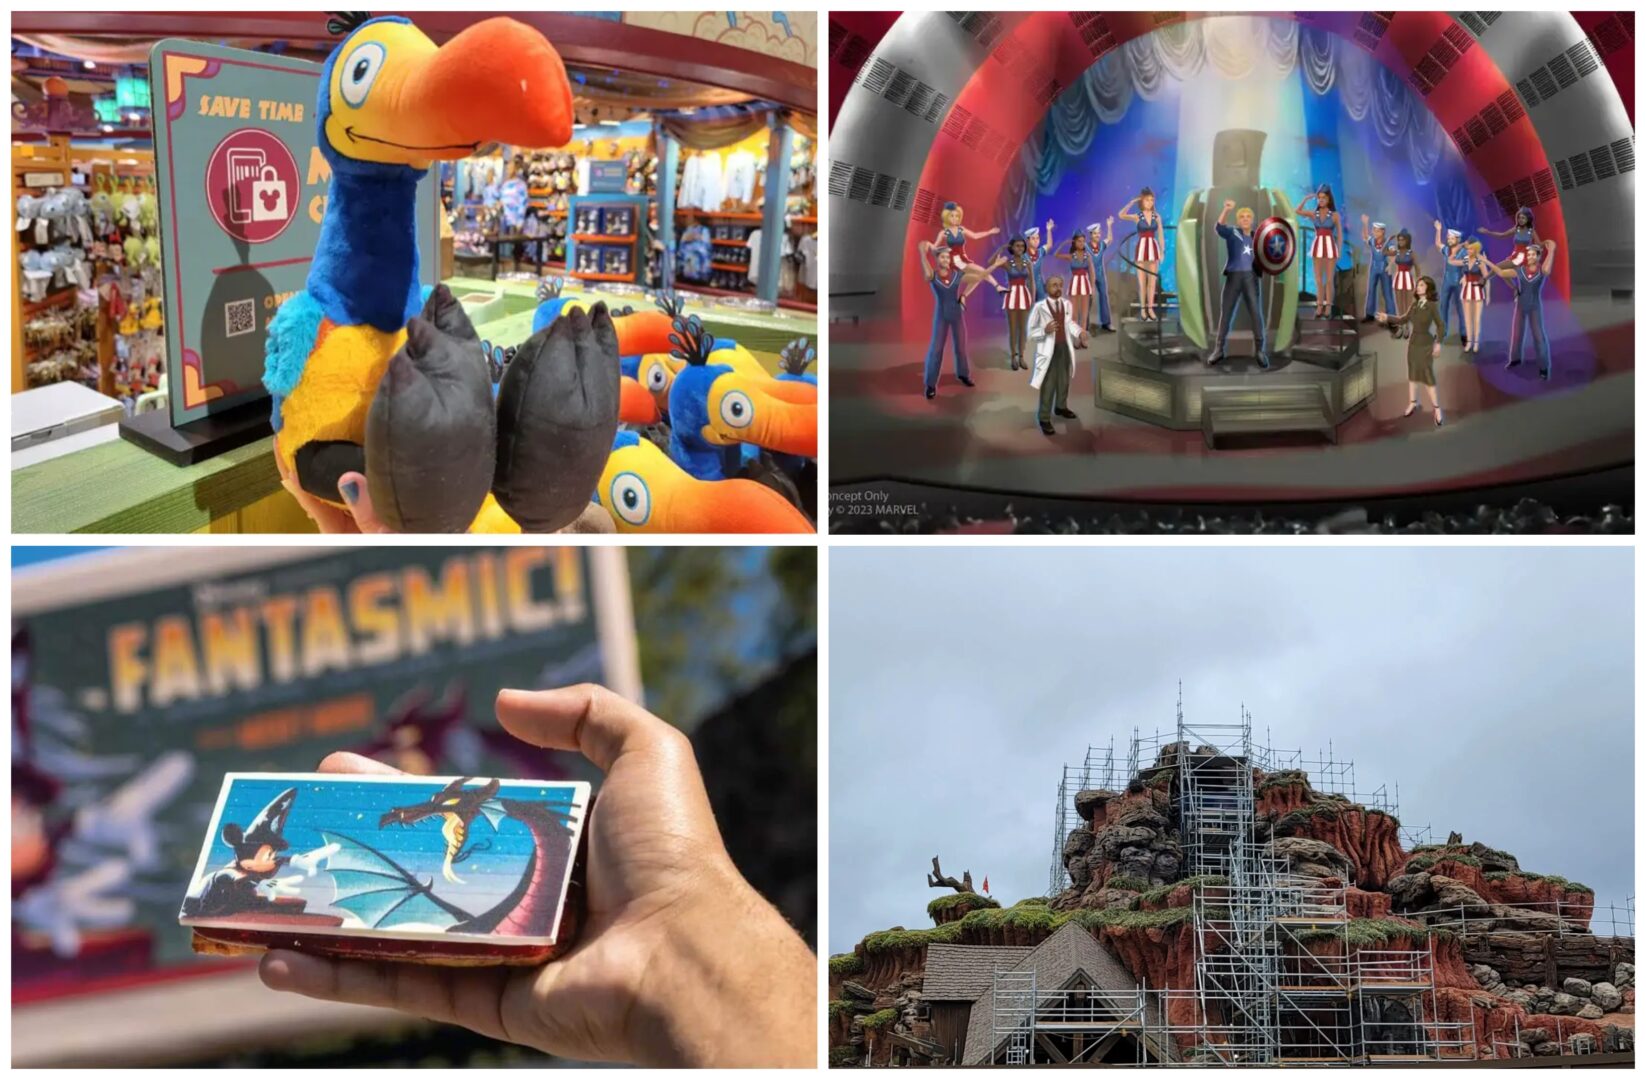 Disney News Highlights: Old Splash Mountain Top Removed, Roger’s The Musical in Disneyland, Star Tours Being Updated, New Hot Dogs and Cookies at the Parks